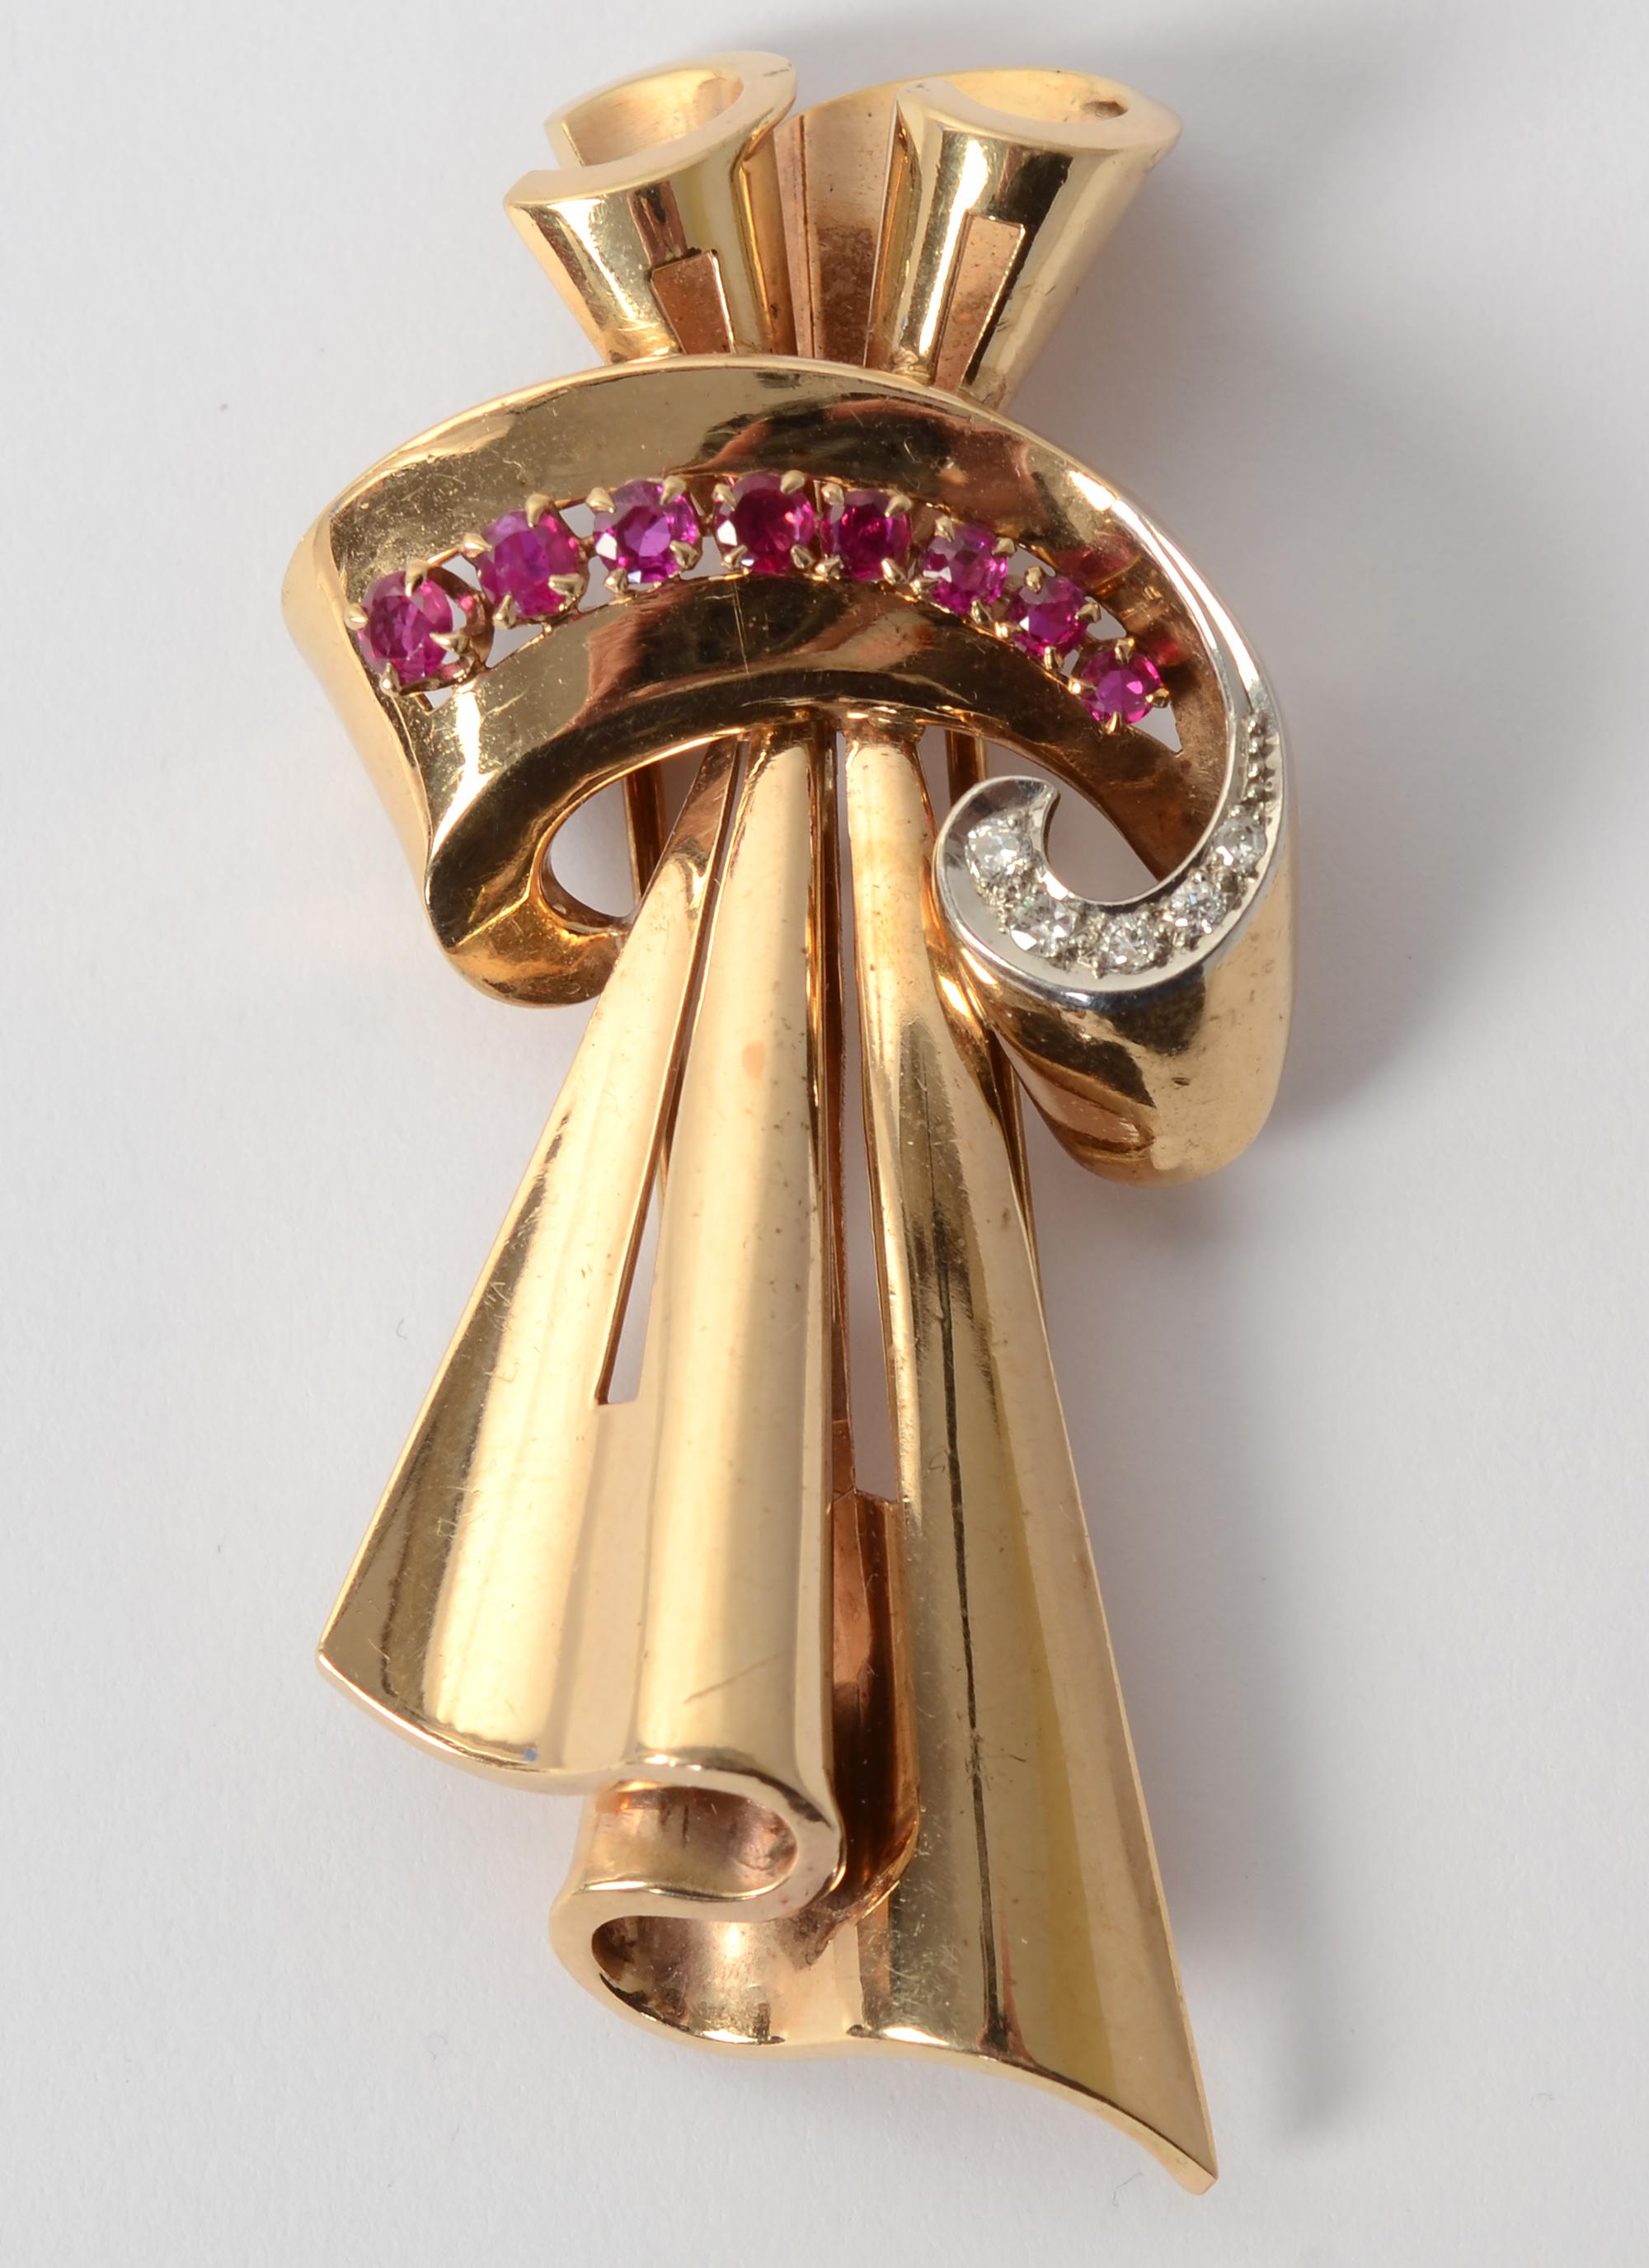 This scrolling gold, diamond and ruby brooch by Tiffany is the epitome of Retro design. Two draped lengthwise loops of gold give the appearance of fabric. Scrolling across the front is a gracefully curved band of gold on which are nine graduated